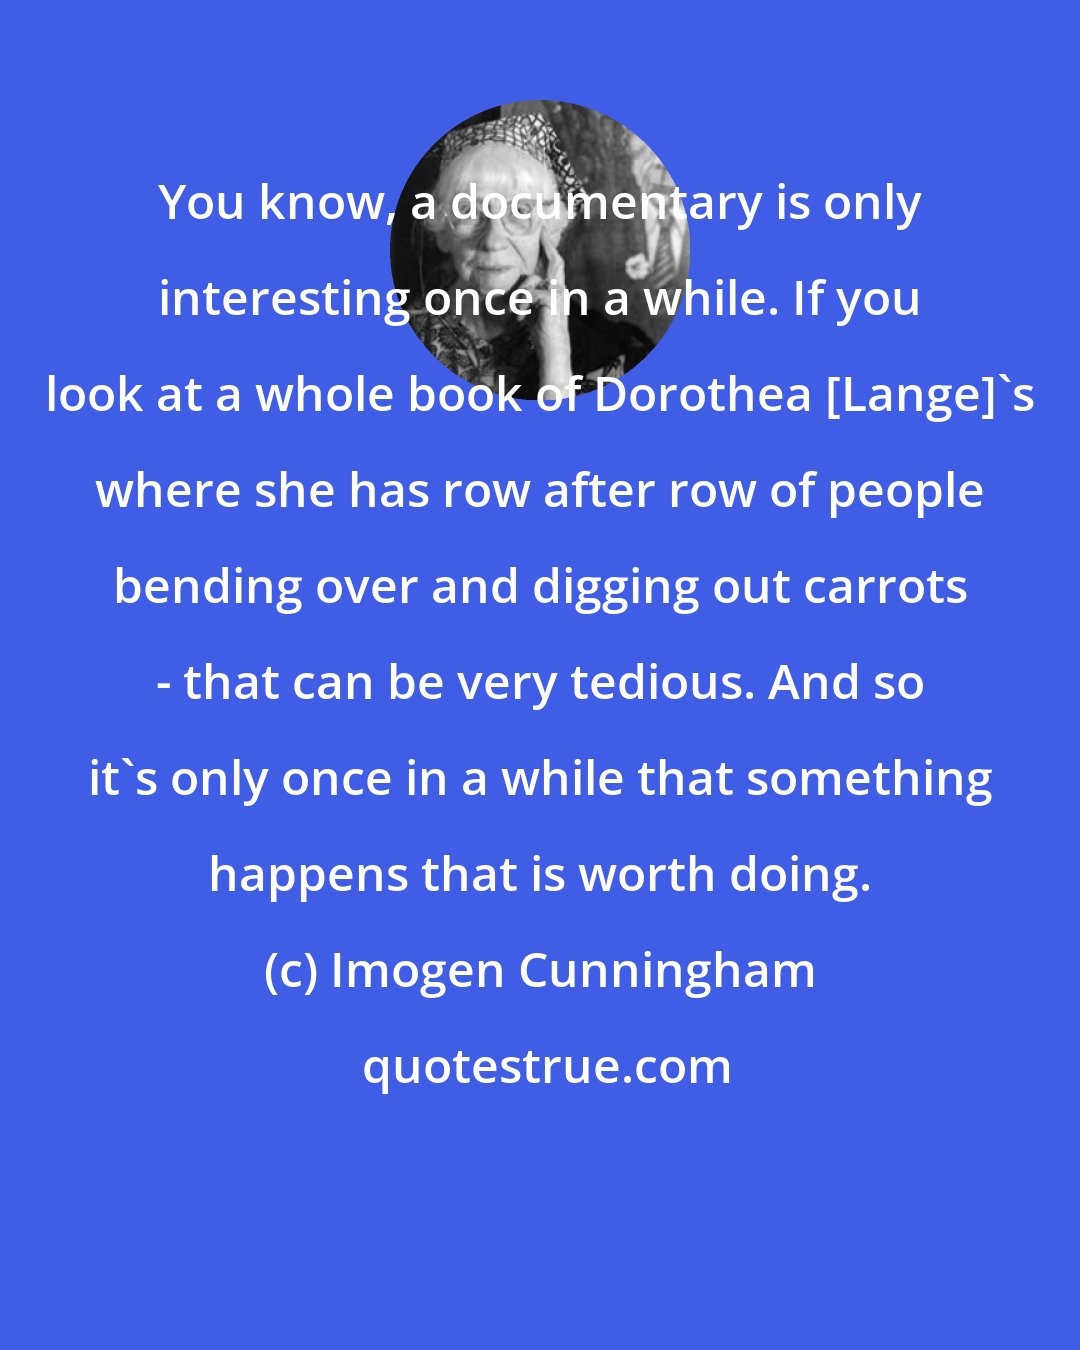 Imogen Cunningham: You know, a documentary is only interesting once in a while. If you look at a whole book of Dorothea [Lange]'s where she has row after row of people bending over and digging out carrots - that can be very tedious. And so it's only once in a while that something happens that is worth doing.